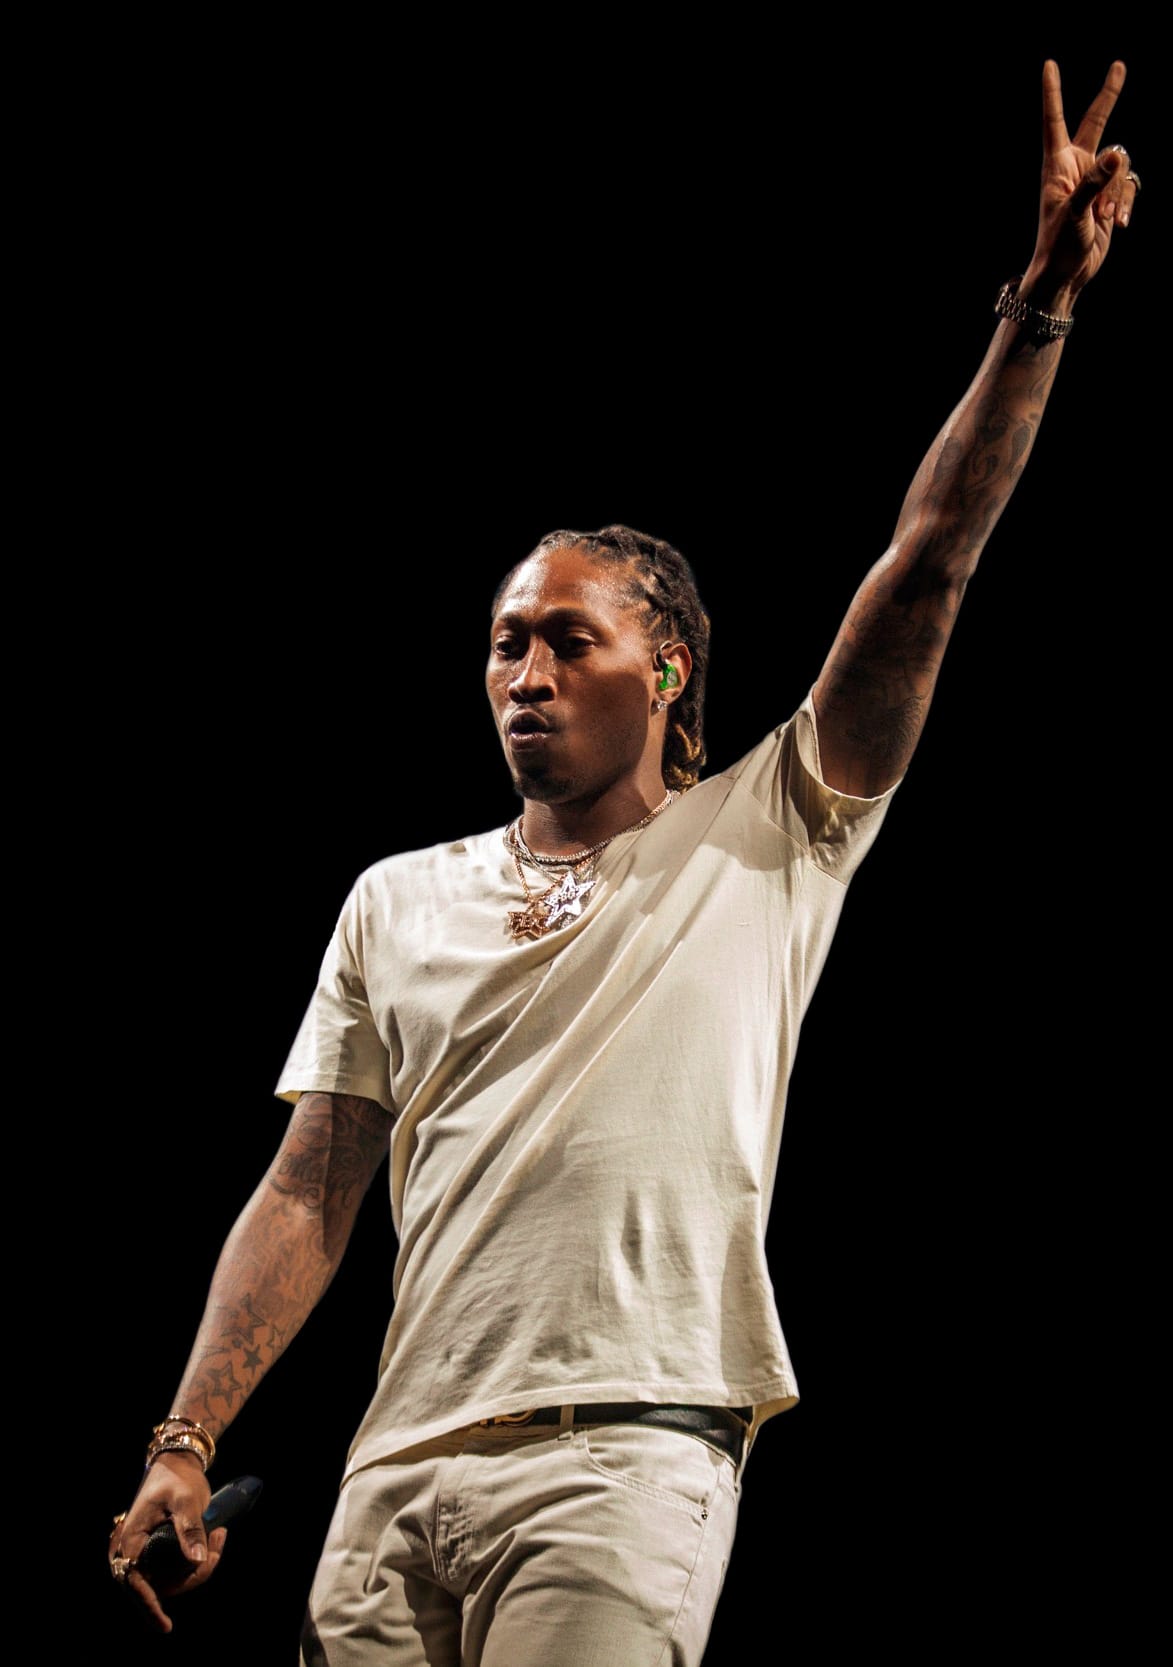 Future giving the peace sign to a crowd.